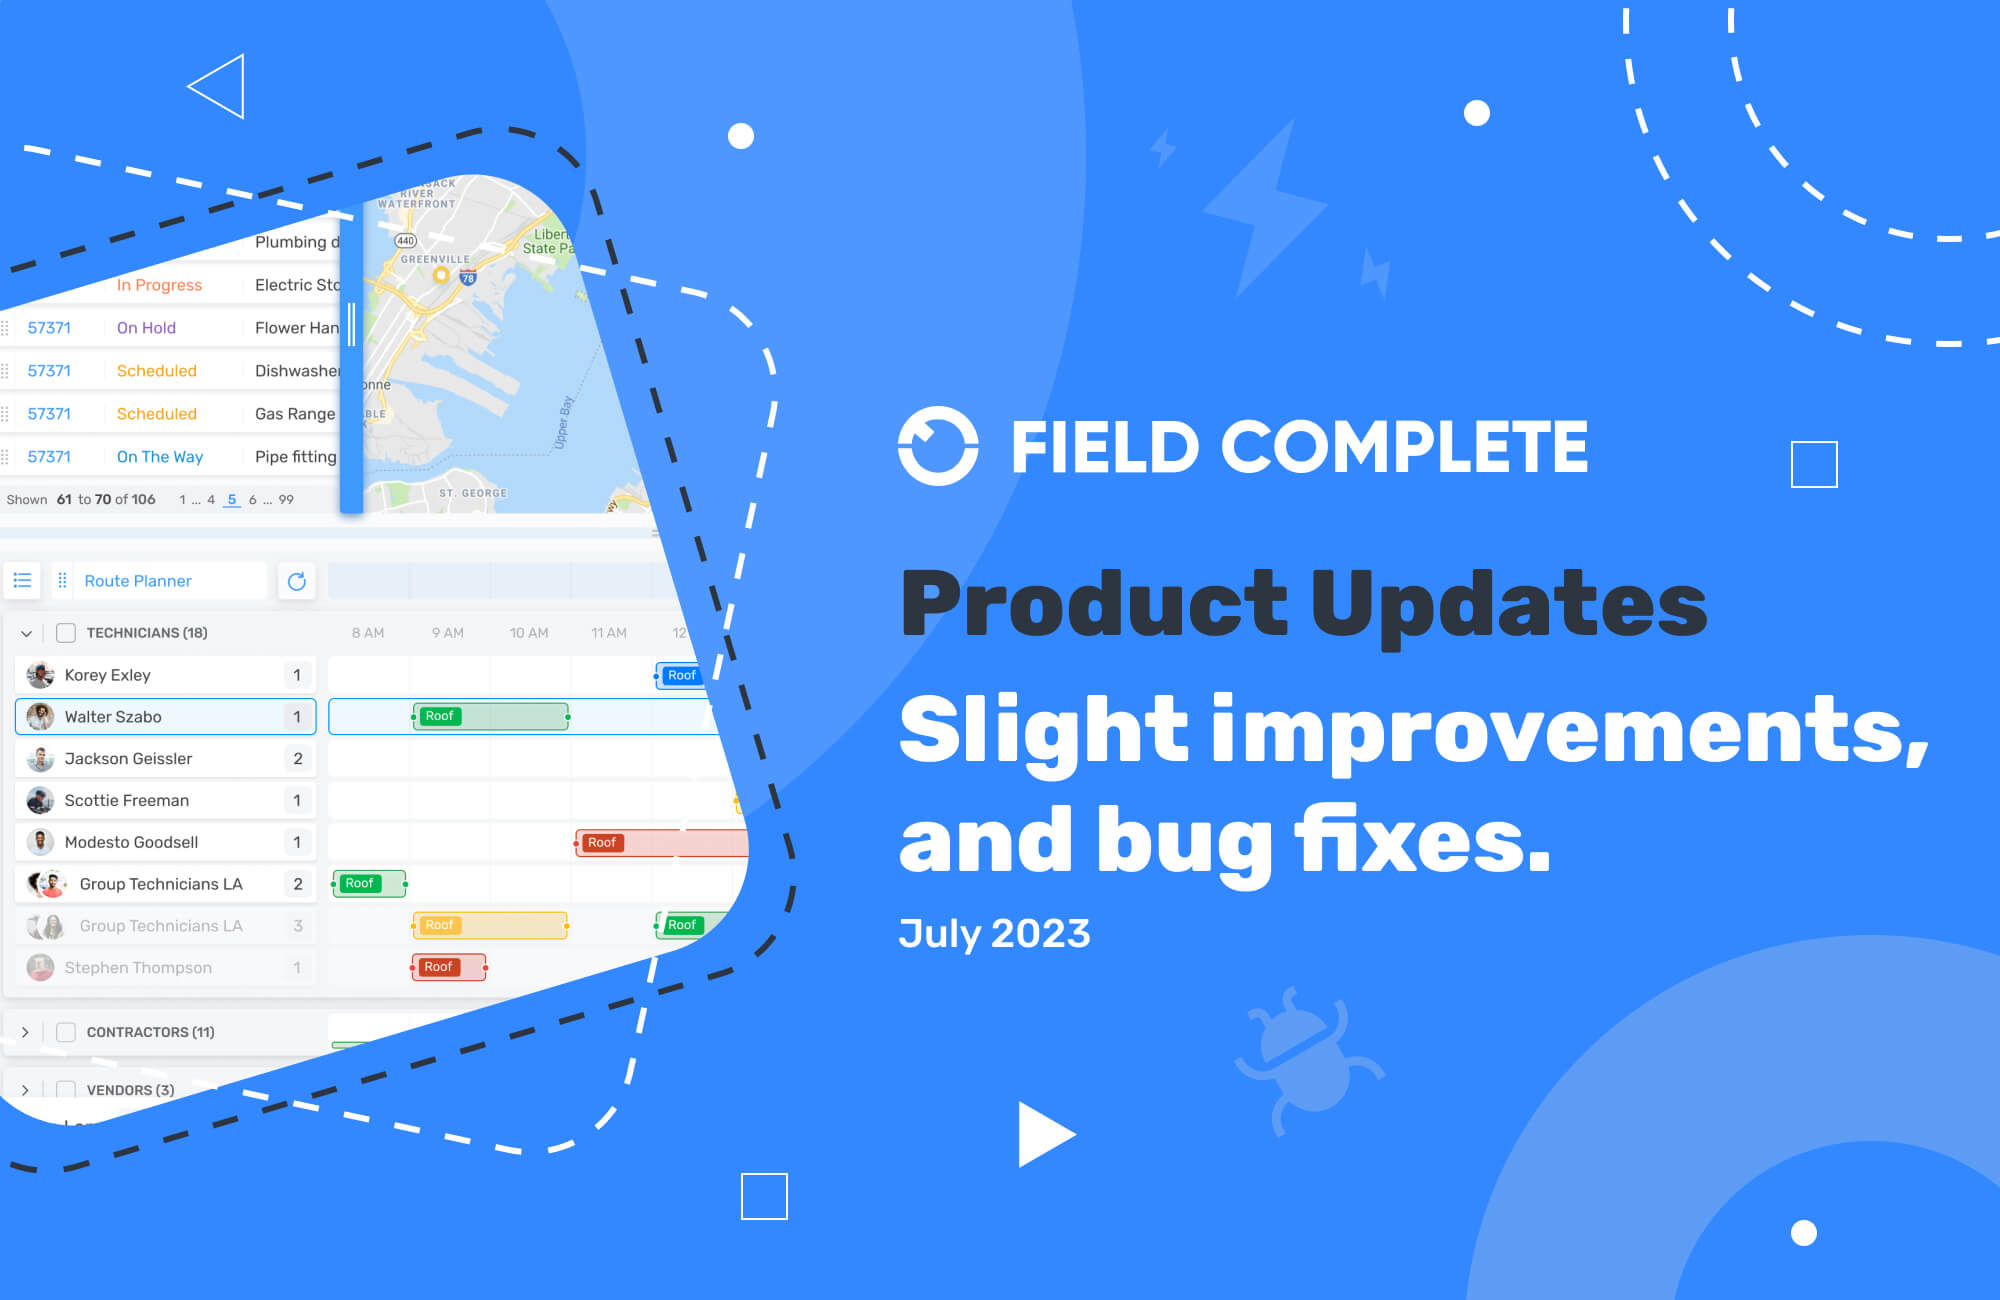 Field Complete Product Updates July 2023